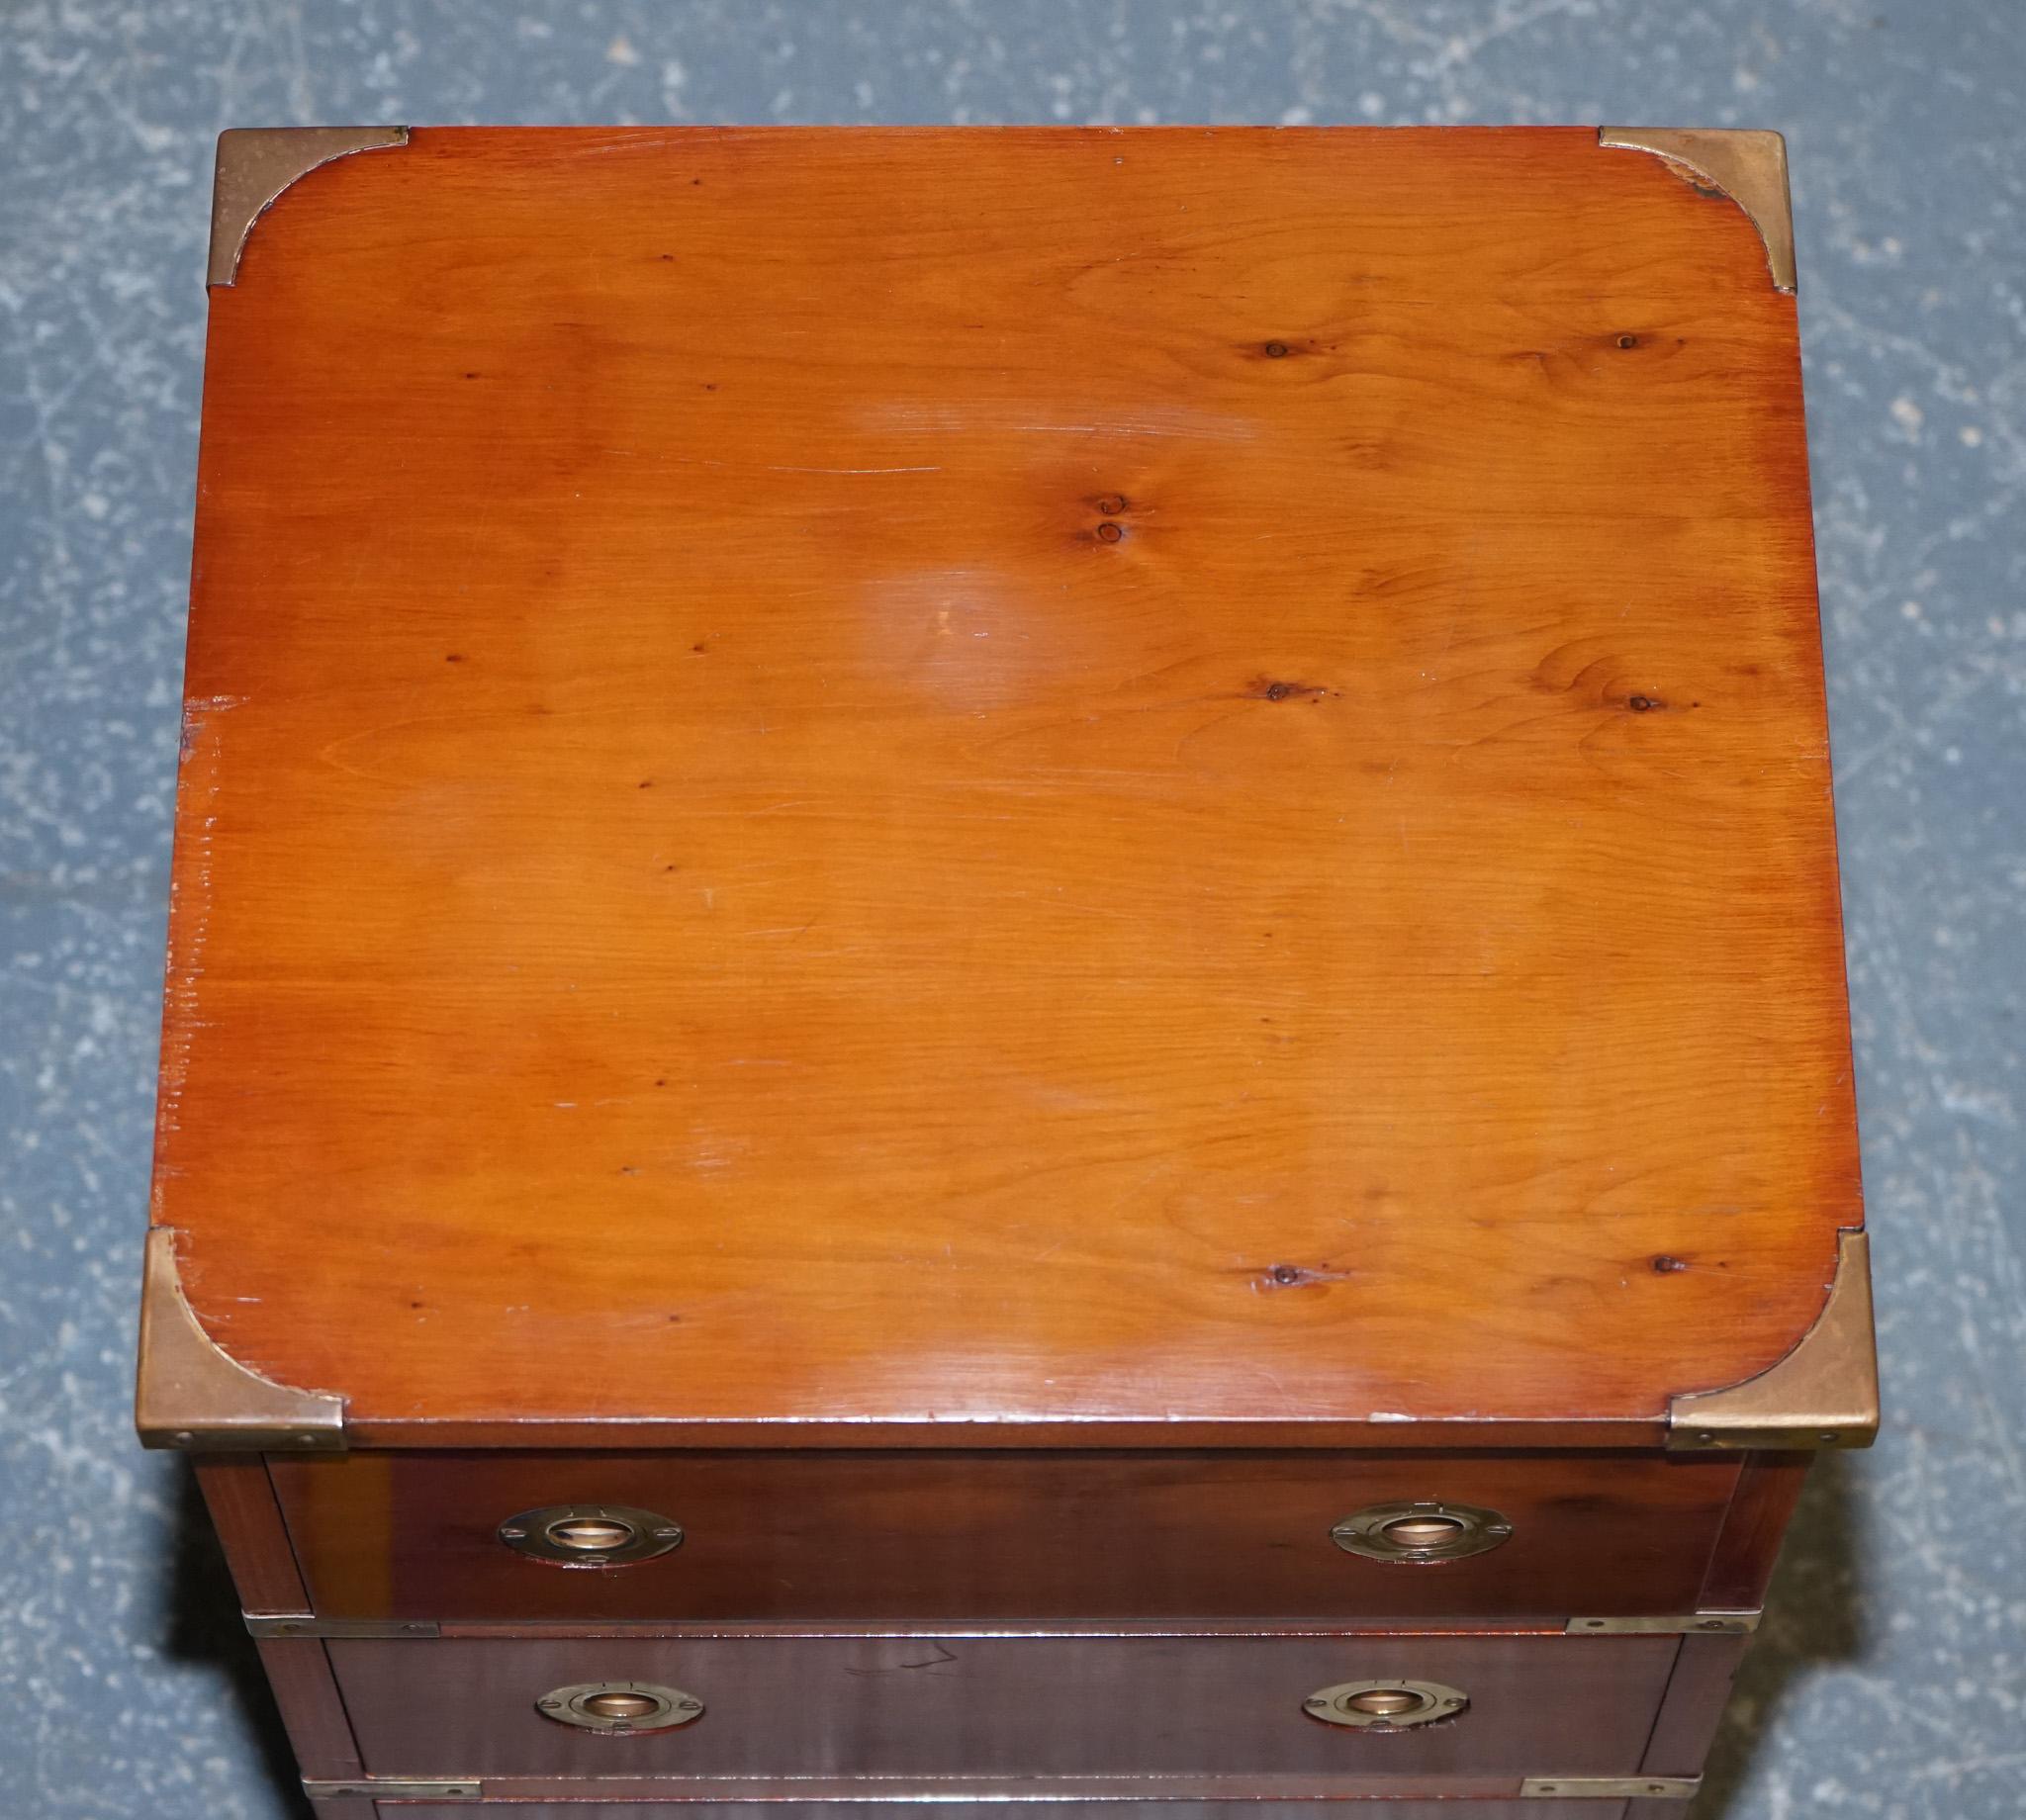 20th Century Vintage Yew Wood Military Campaign Chest of Drawers with 4 Drawers Brass Fitting